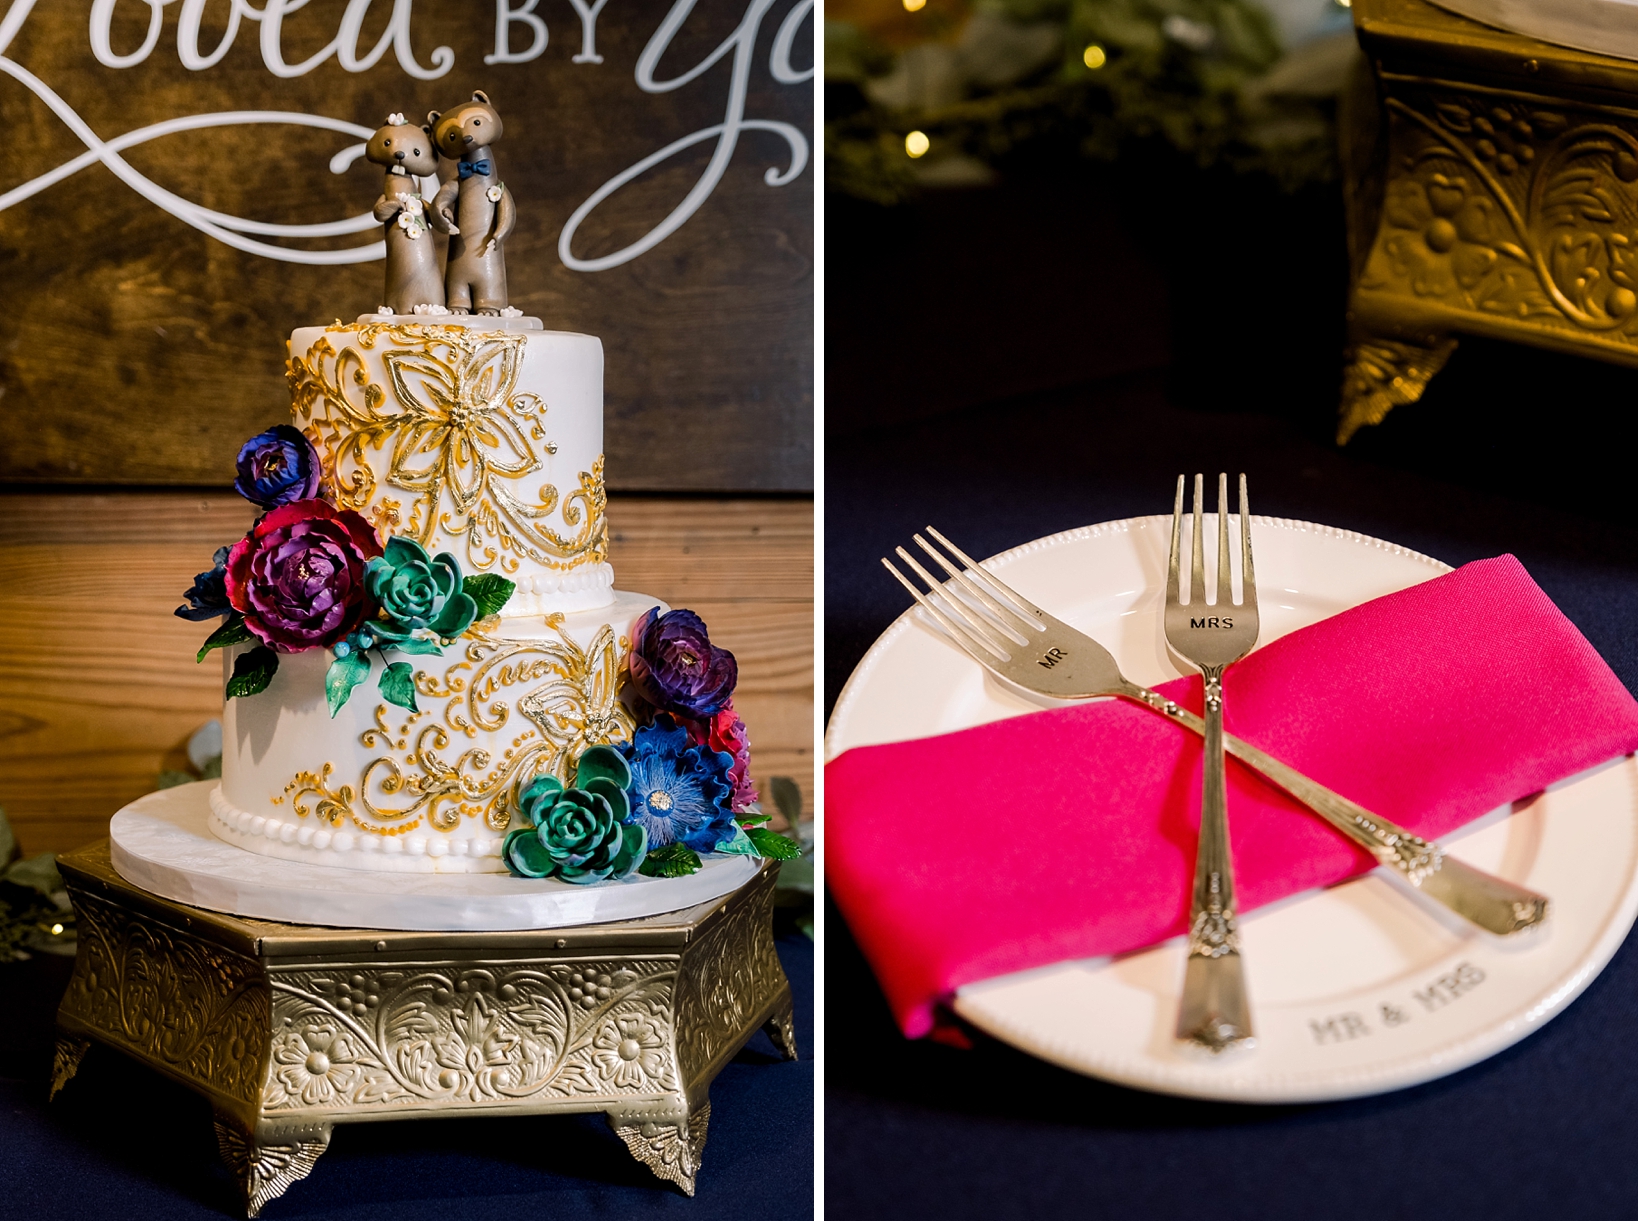 Wedding cake details include florals and two sugar otters as cake toppers and the cake forks on a plate